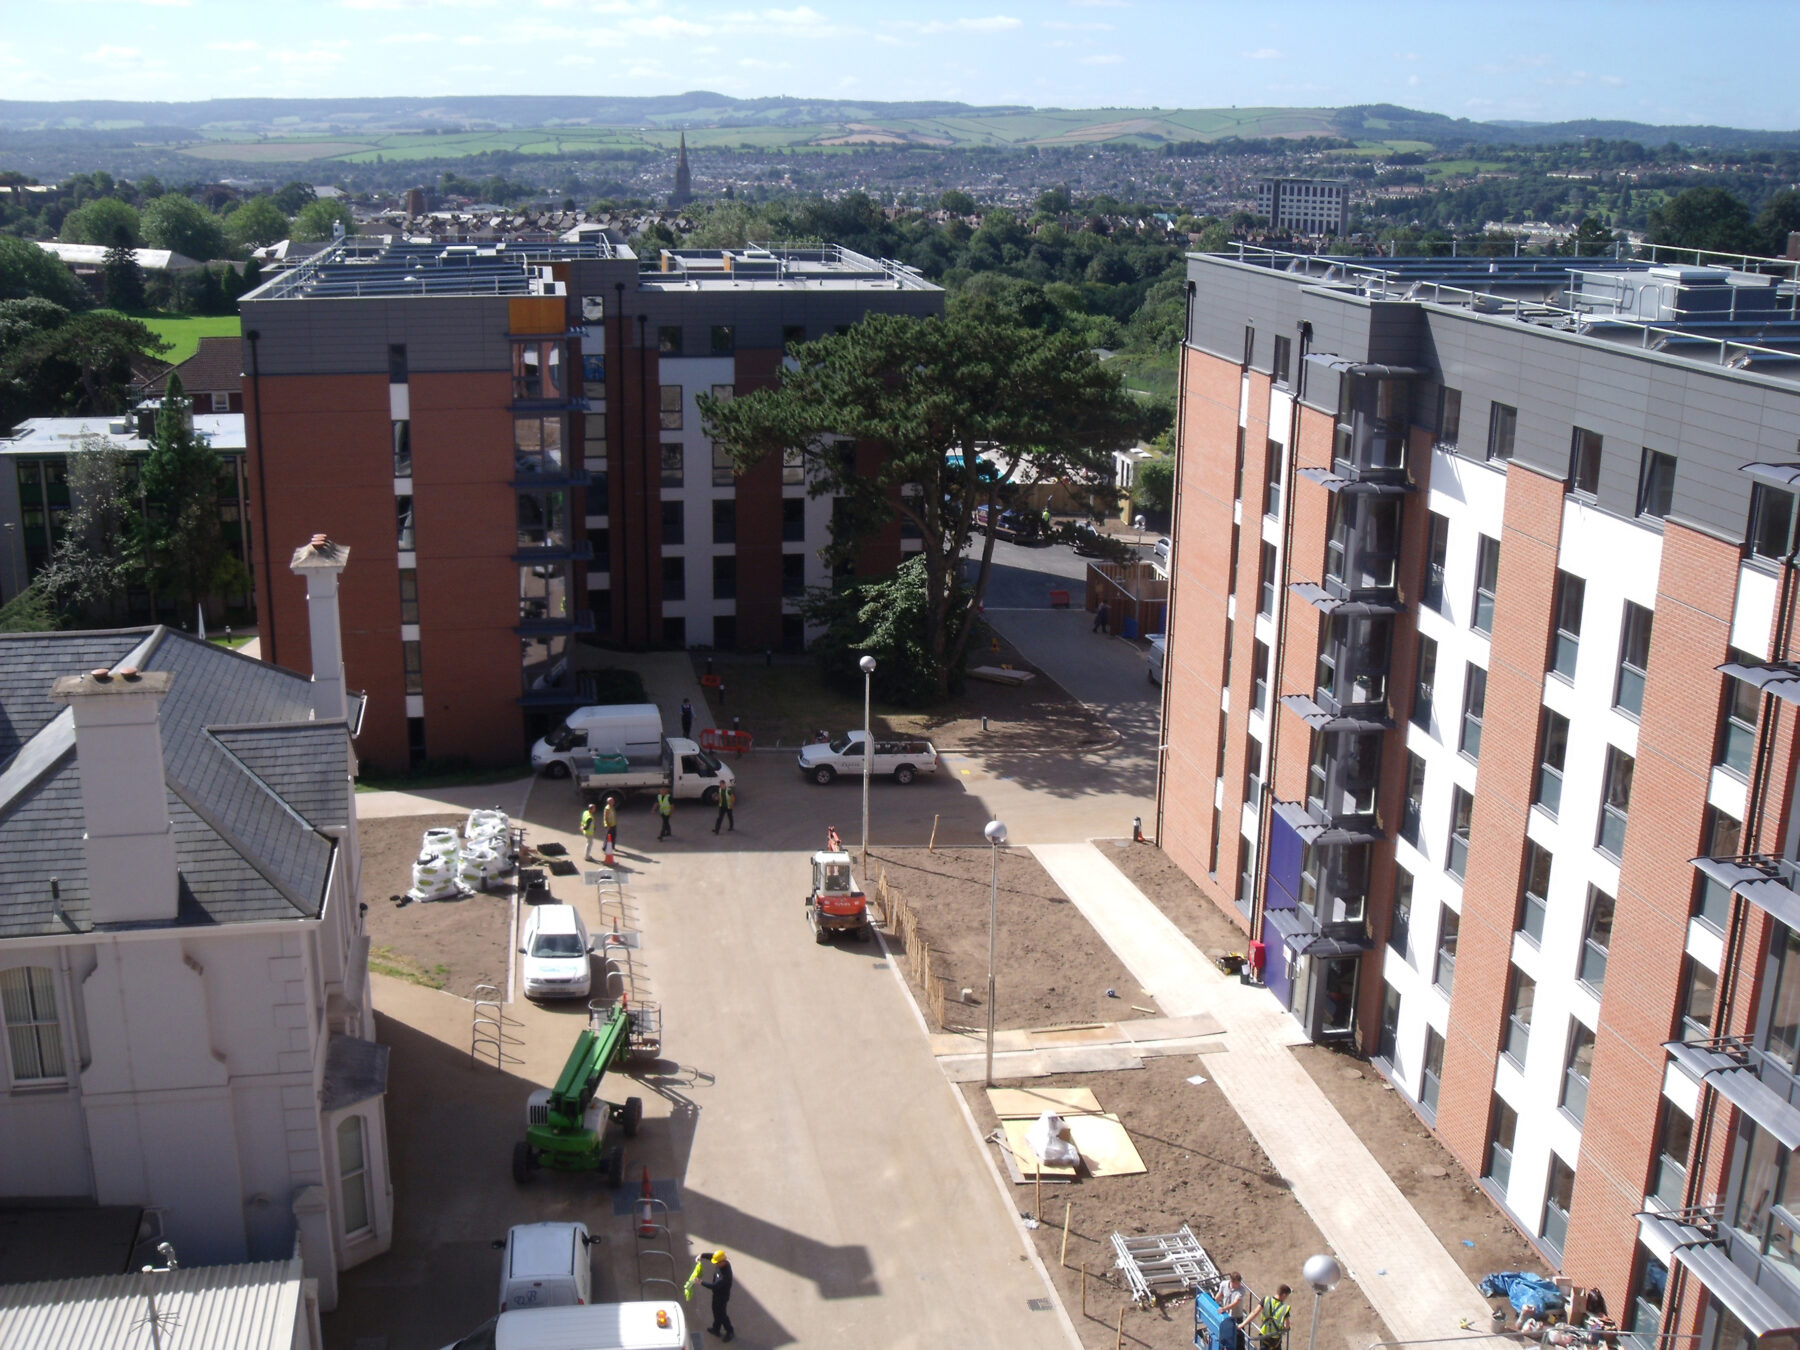 University of Exeter Lafrowda - UPP - Cowlin Construction